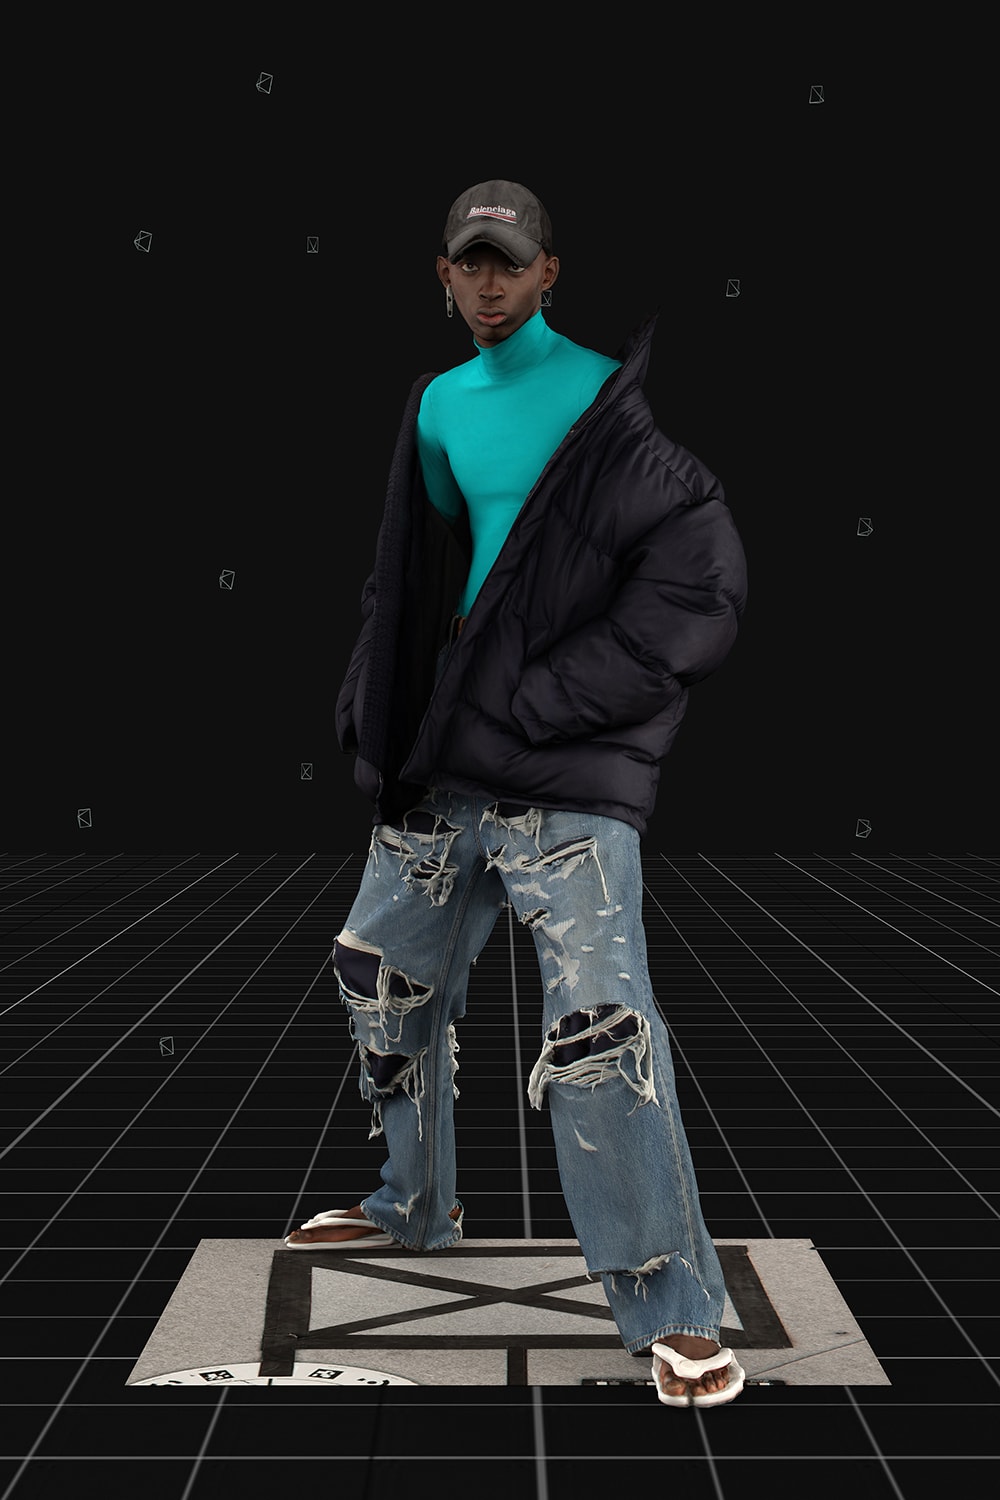 balenciaga demna gvasalia fall 2021 collection video game afterworld the age of tomorrow details release information play online